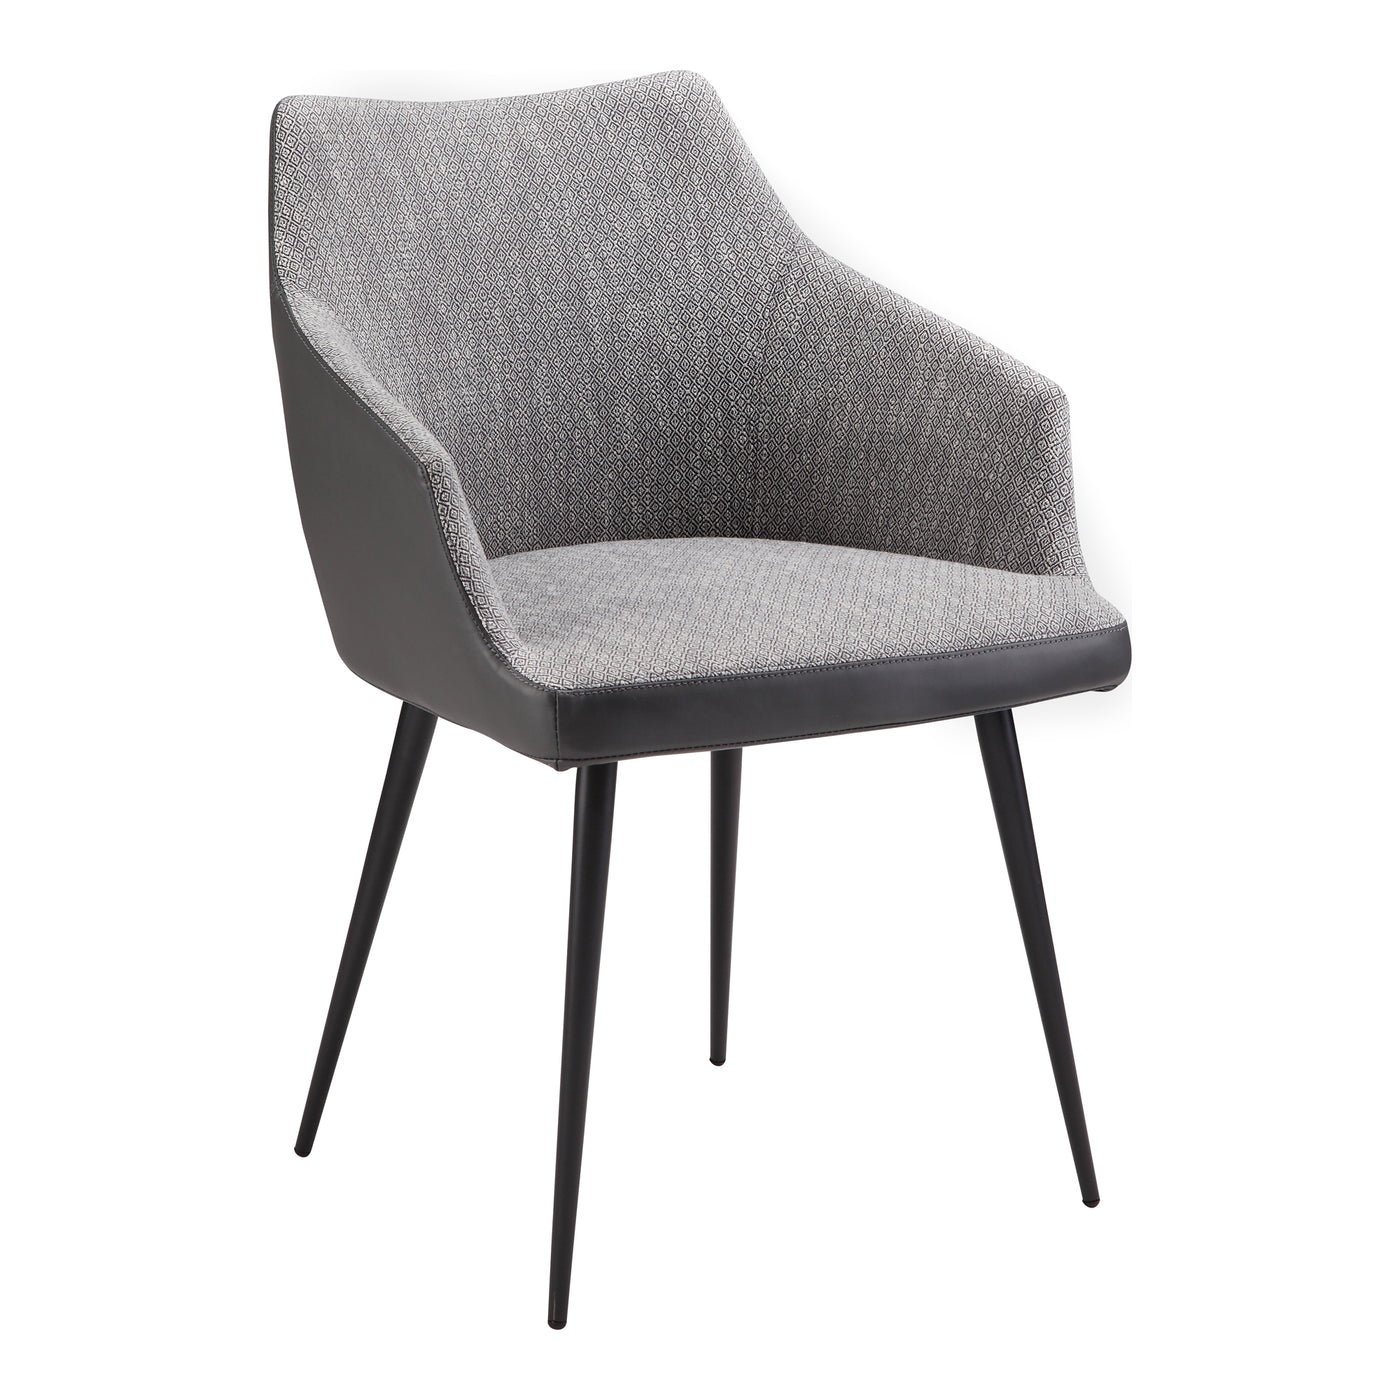 The Beckett features a strong, molded PVC seat frame on steel legs, that give the chair a slim profile but strength to las...